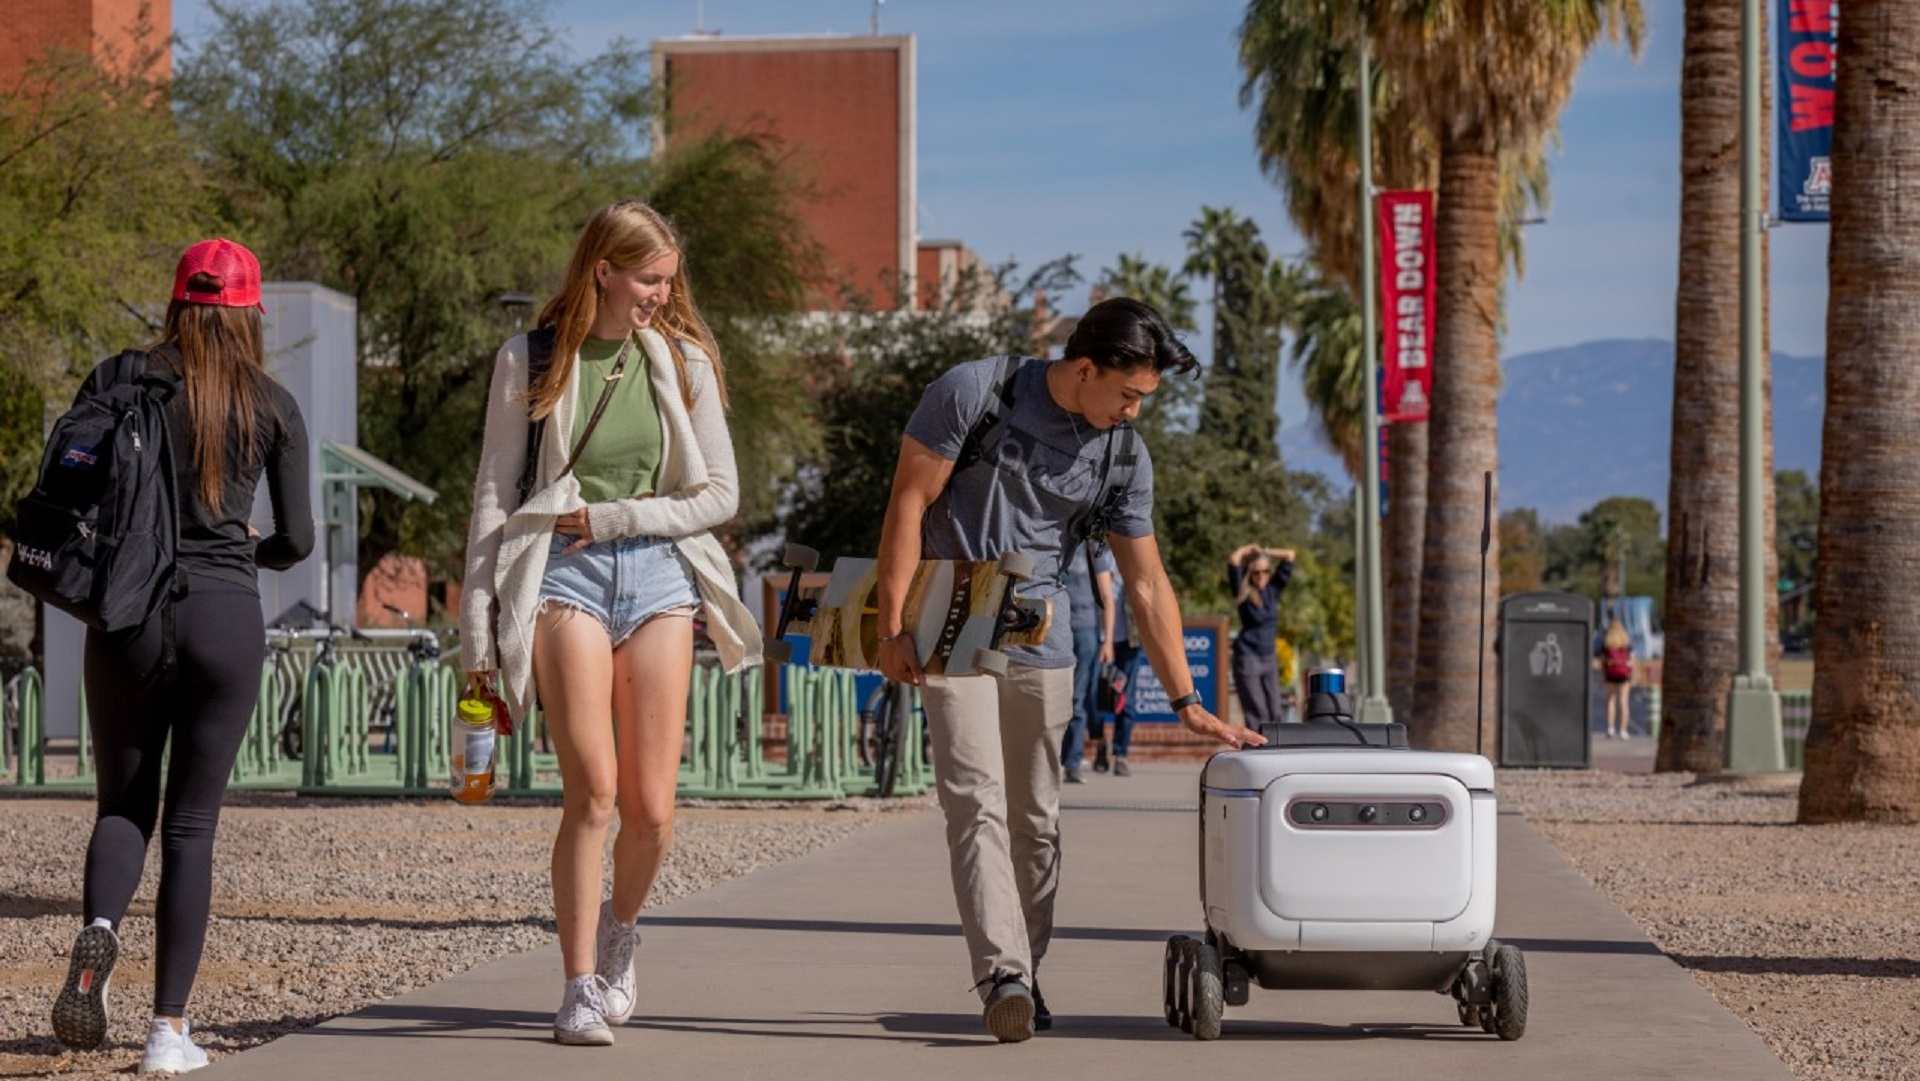 University of Arizona students interact with an autonomous food delivery "robot" operated by Grubhub and supplied by the Russian conglomerate Yandex.